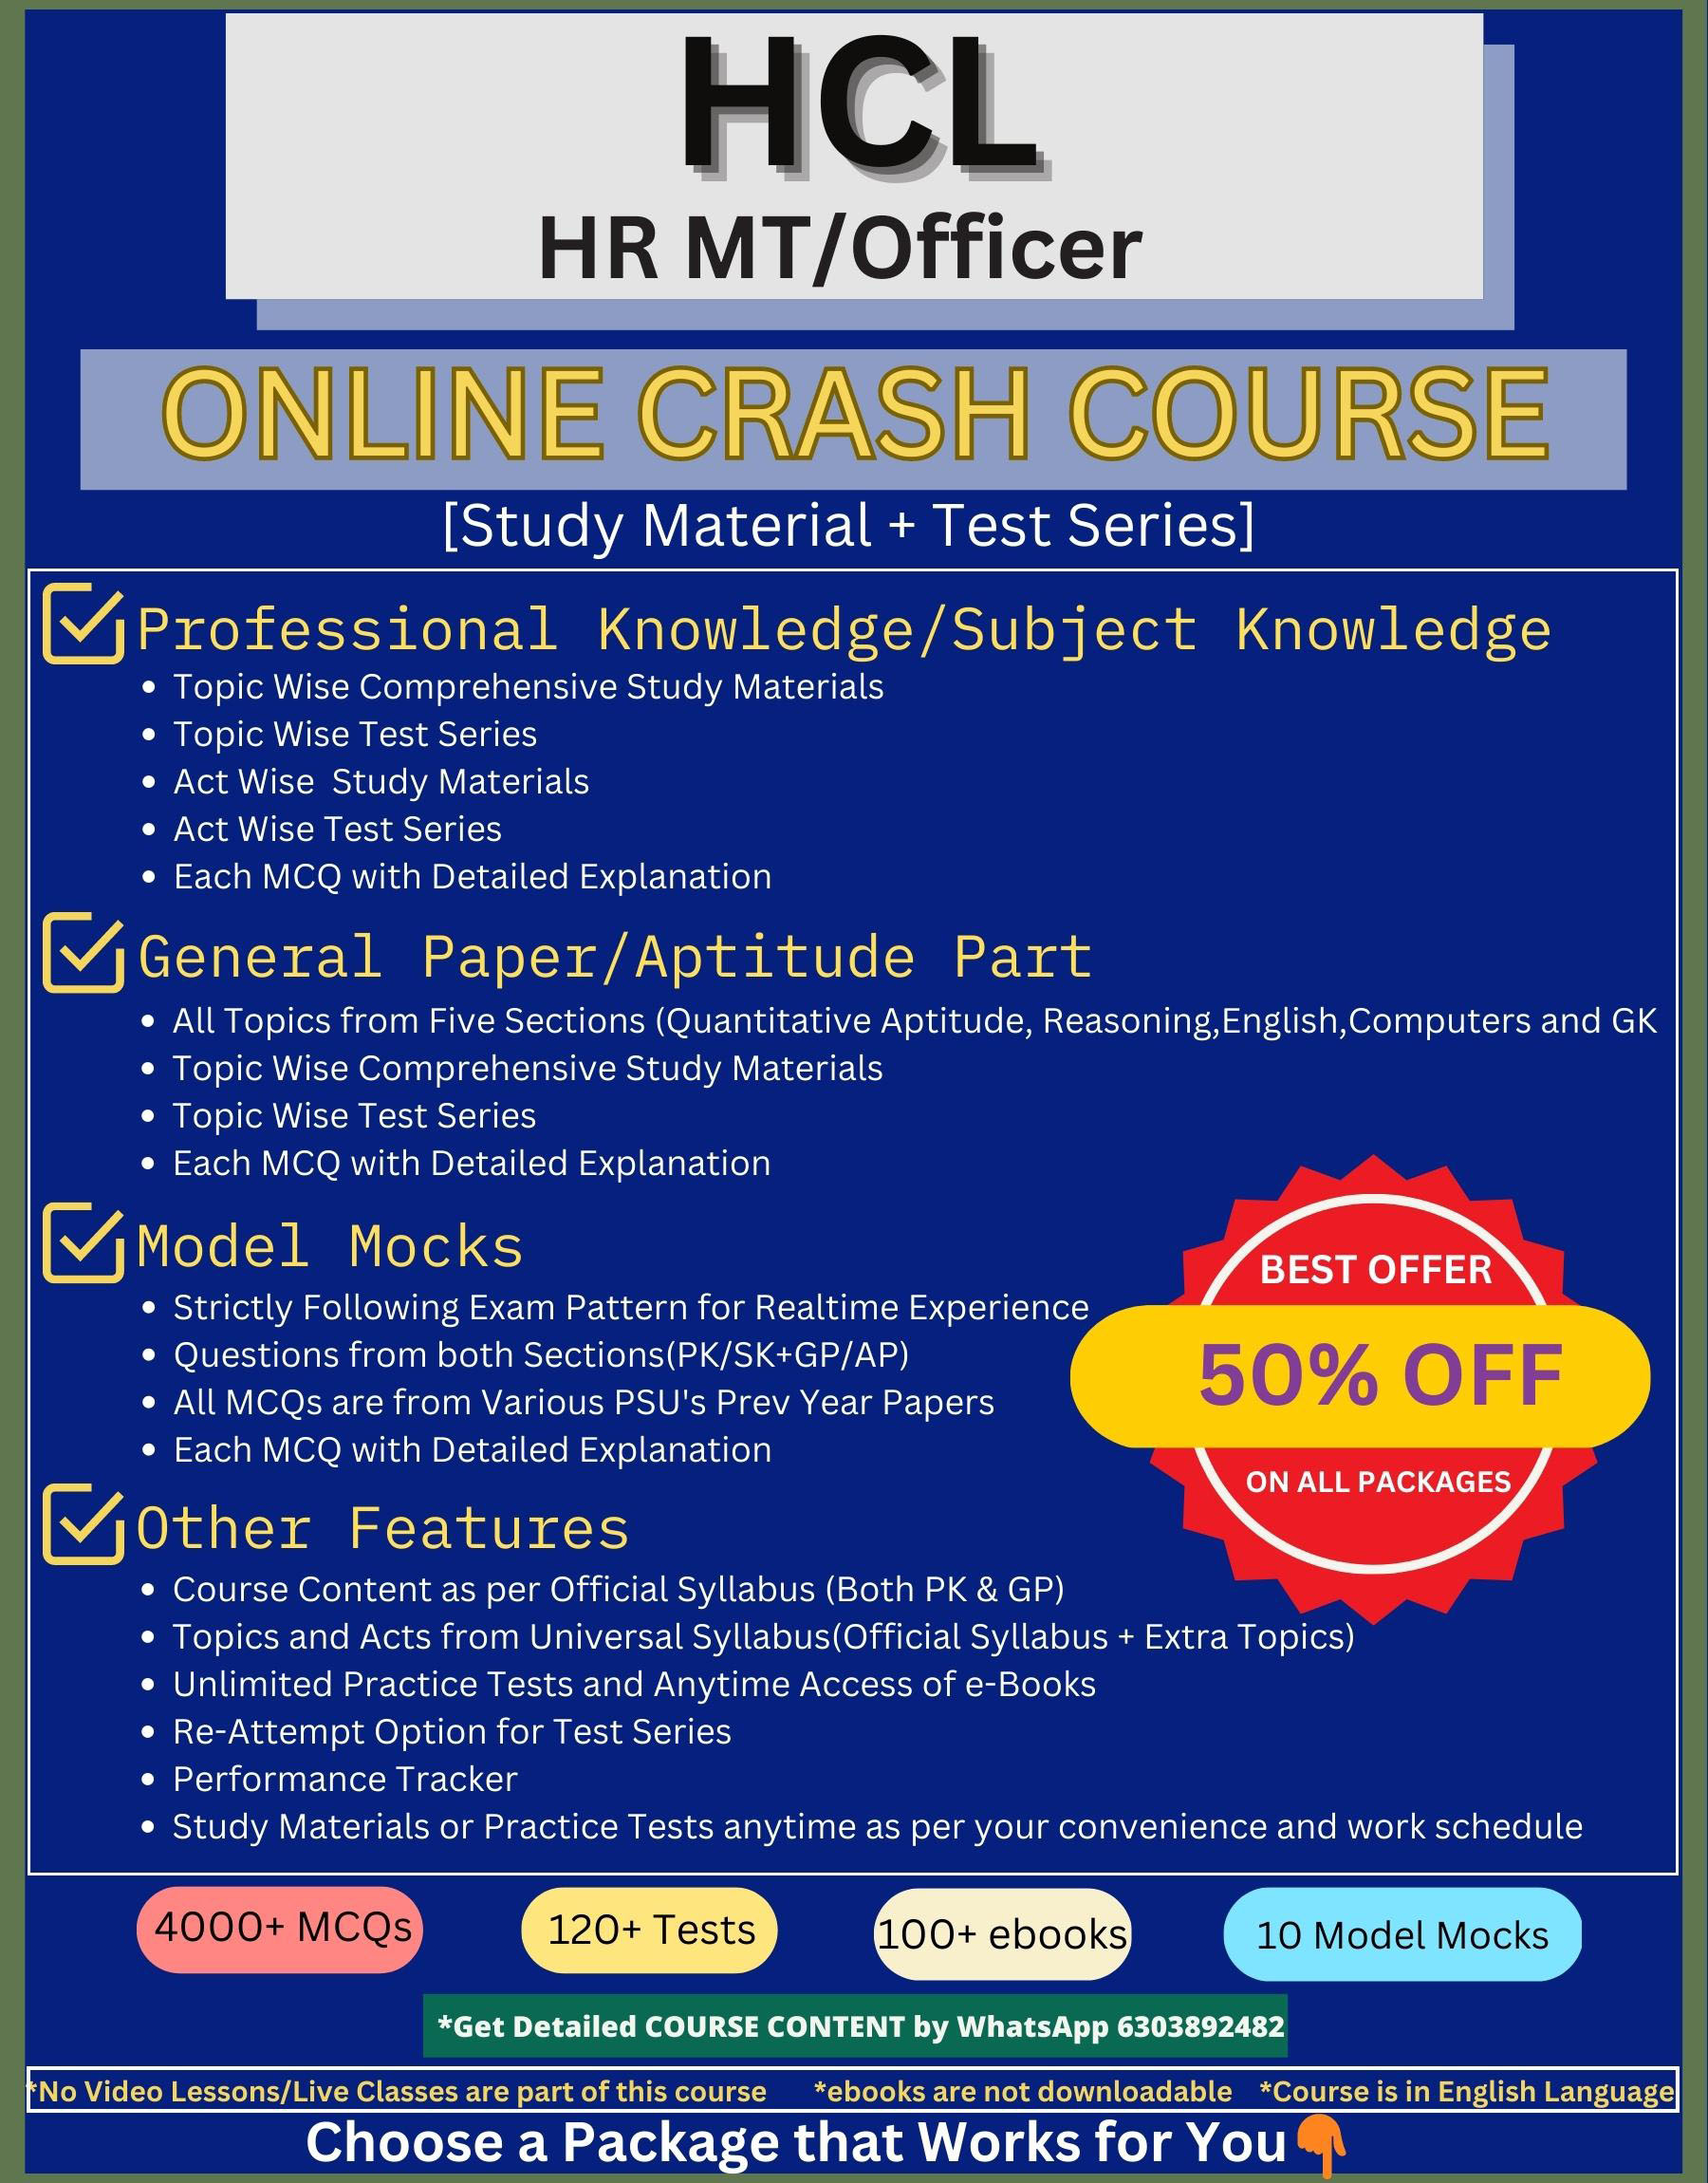 Online course with test series and study materials for hindustan copper hcl mt hr